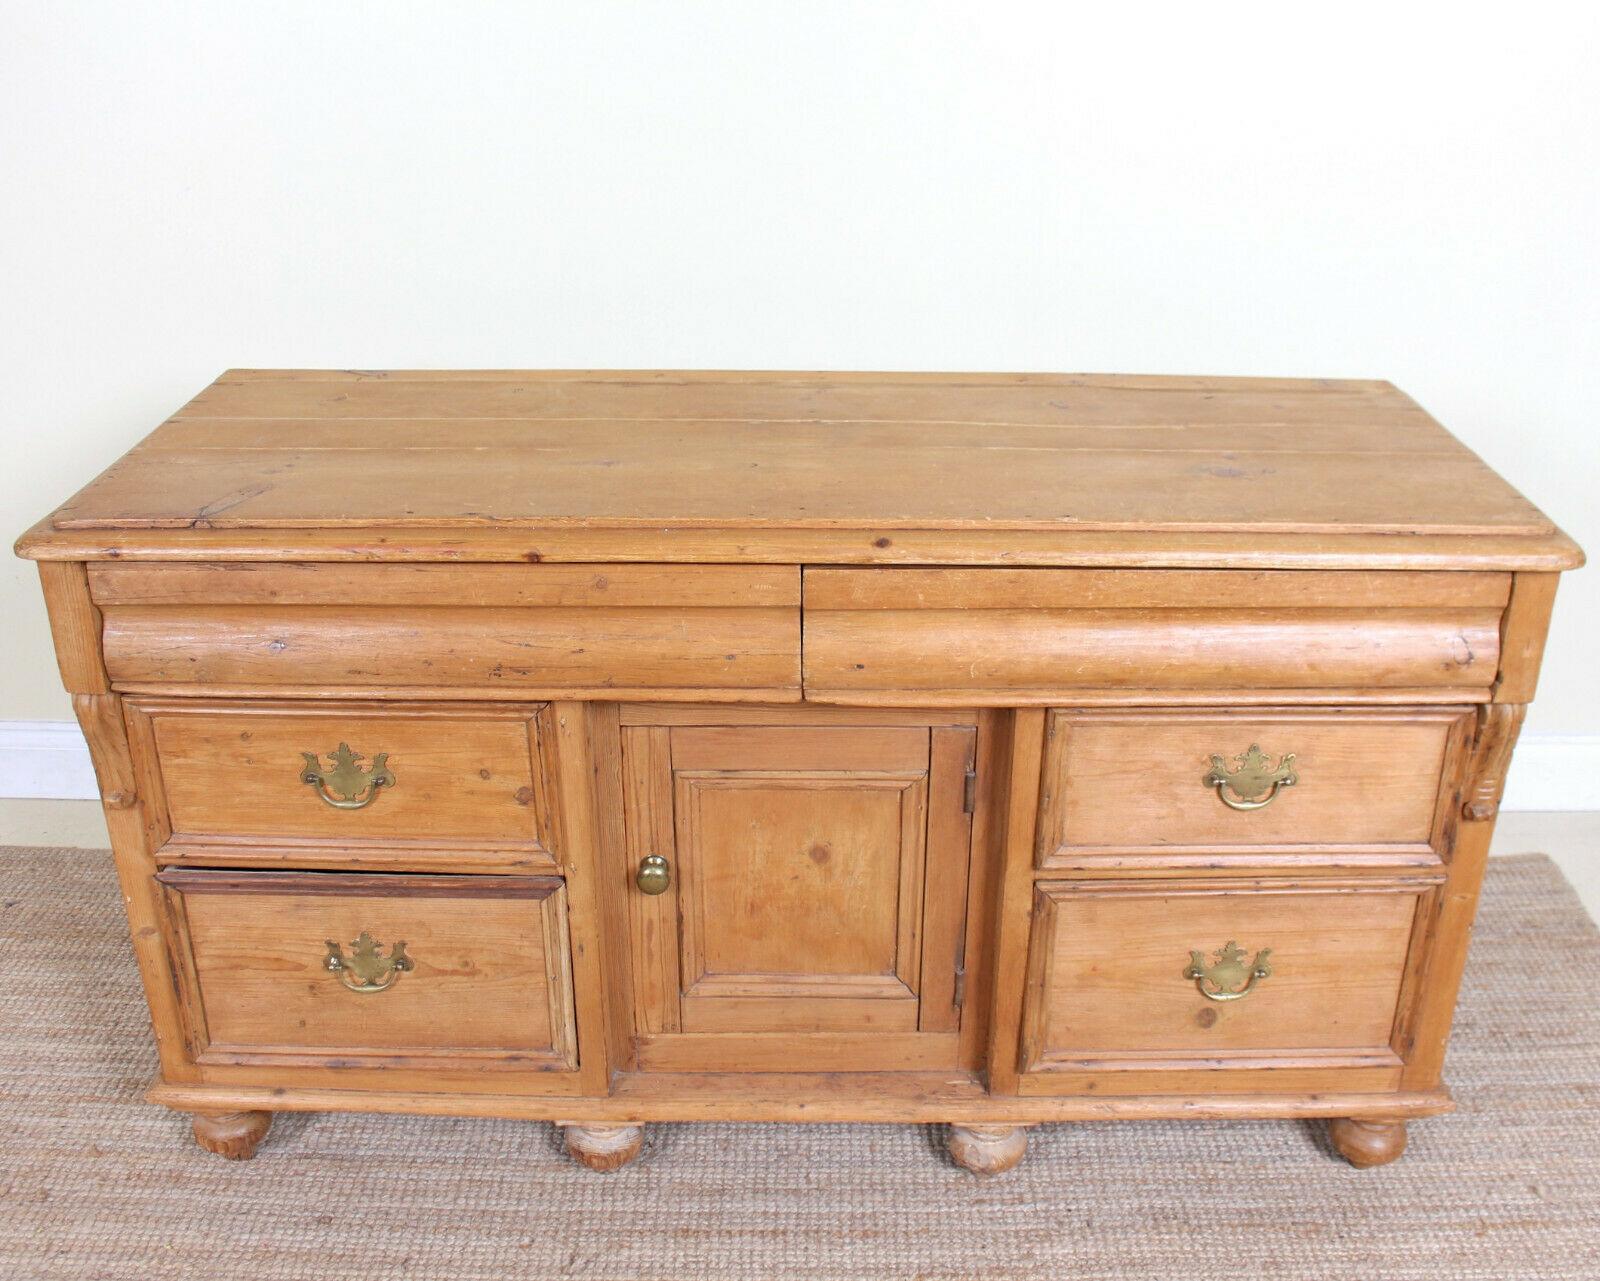 An impressive 19th century pine dresser base.

The top with chamfered edges and fitted two long shaped front drawers to frieze. A central cupboard enclosed storage flanked by drawers mounted with good handles, dovetailed jointing and solid